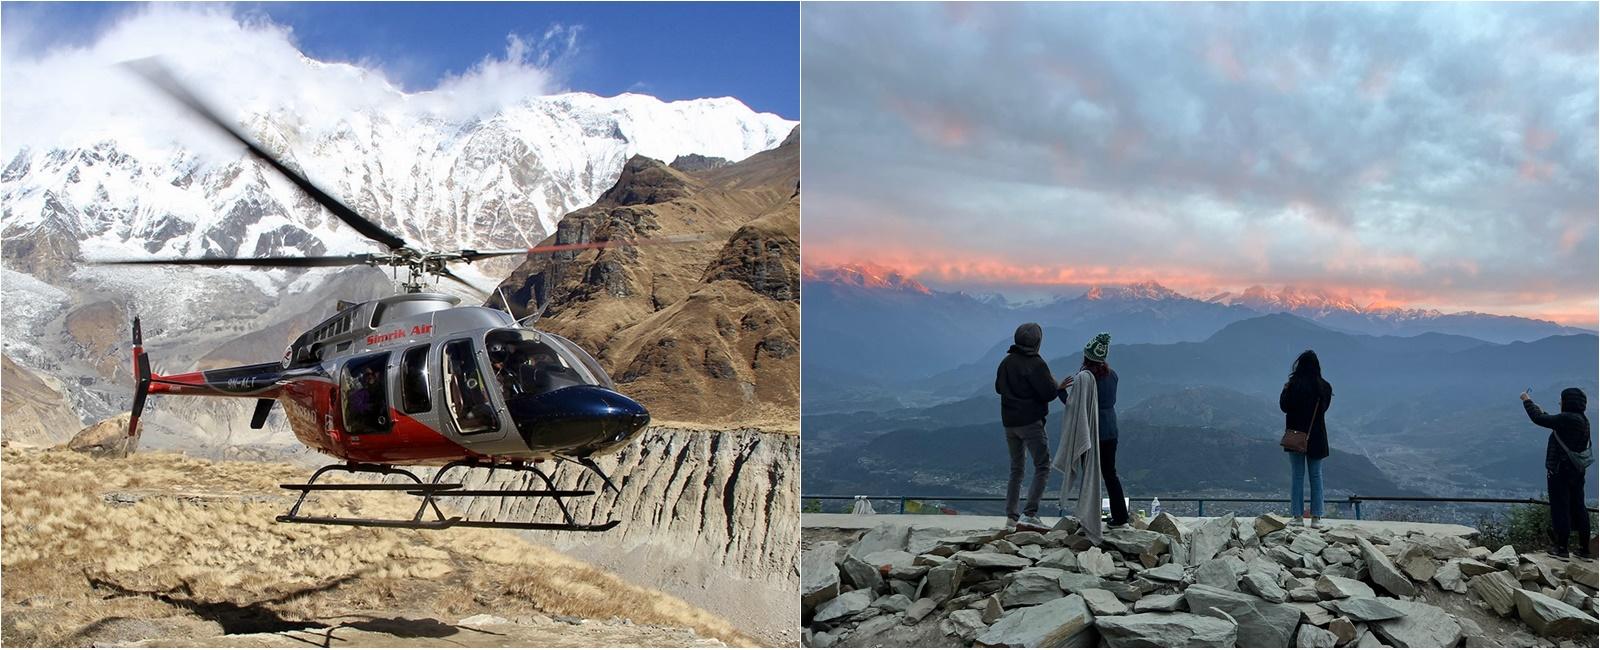 Annapurna Base Camp Helicopter tour with Cultural Sightseeing